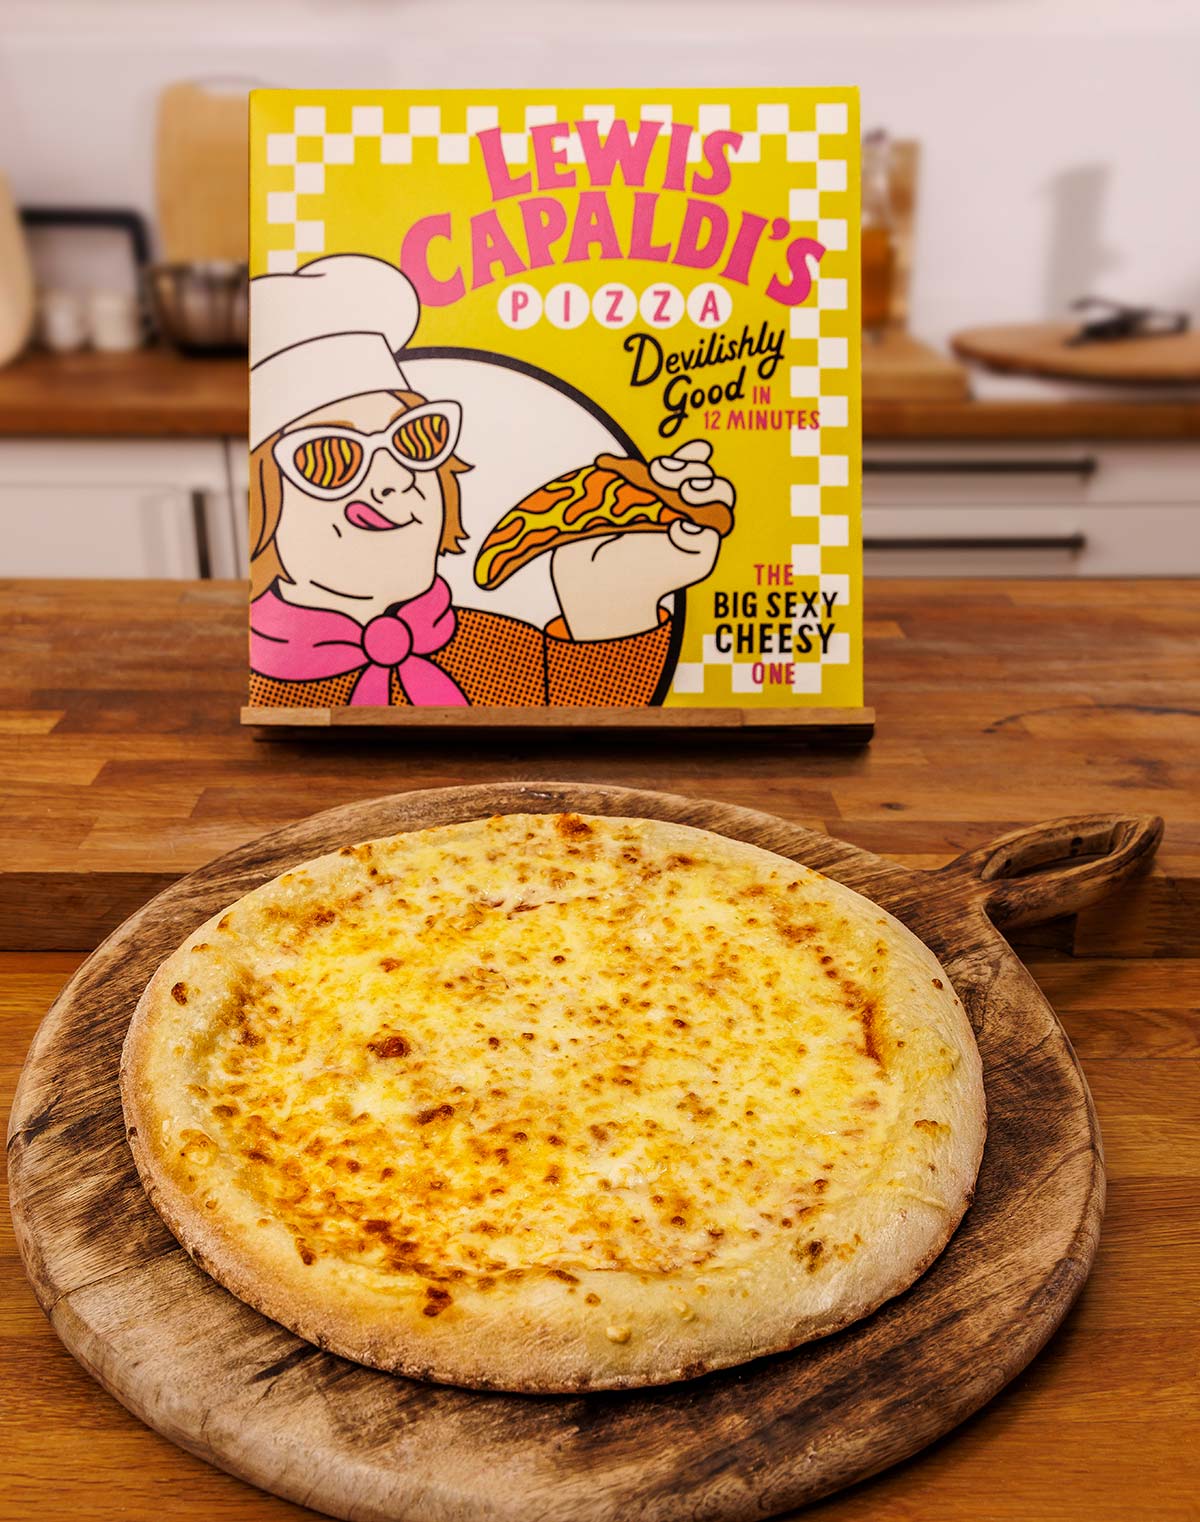 Photo of a cheese pizza on a wooden serving board, with a pizza box behind, branded 'Lewis Capaldi's Pizza'